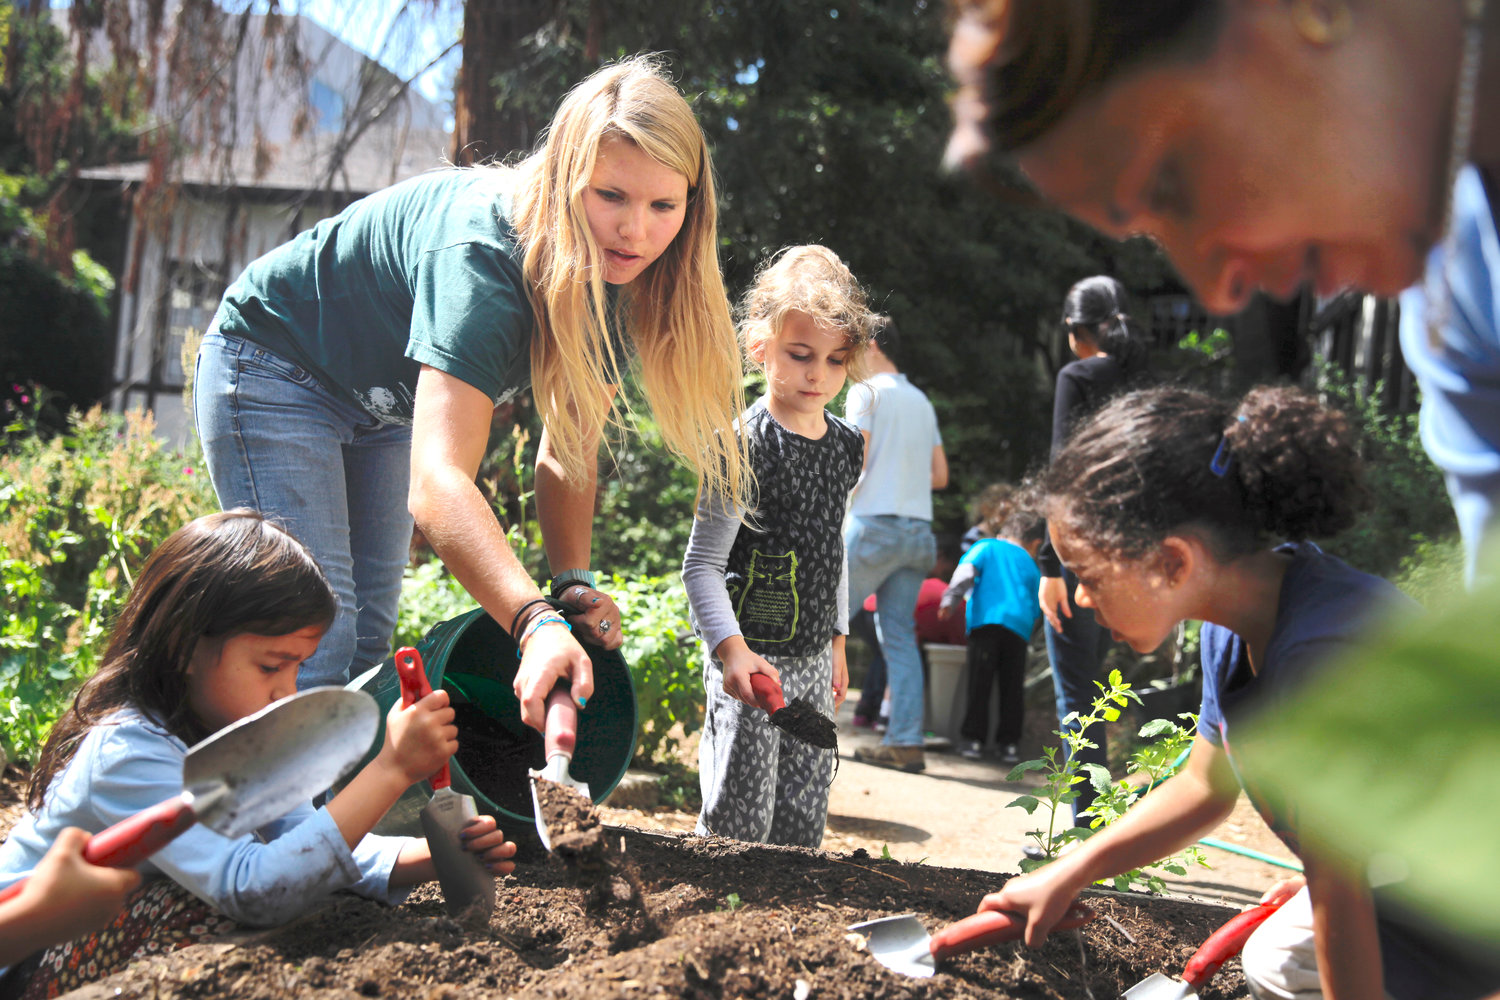 Jenny Wood (second from left), volunteer, shows High Five students how to mix compost with soil during class in the garden at John Muir Elementary School in Berkeley, Calif.